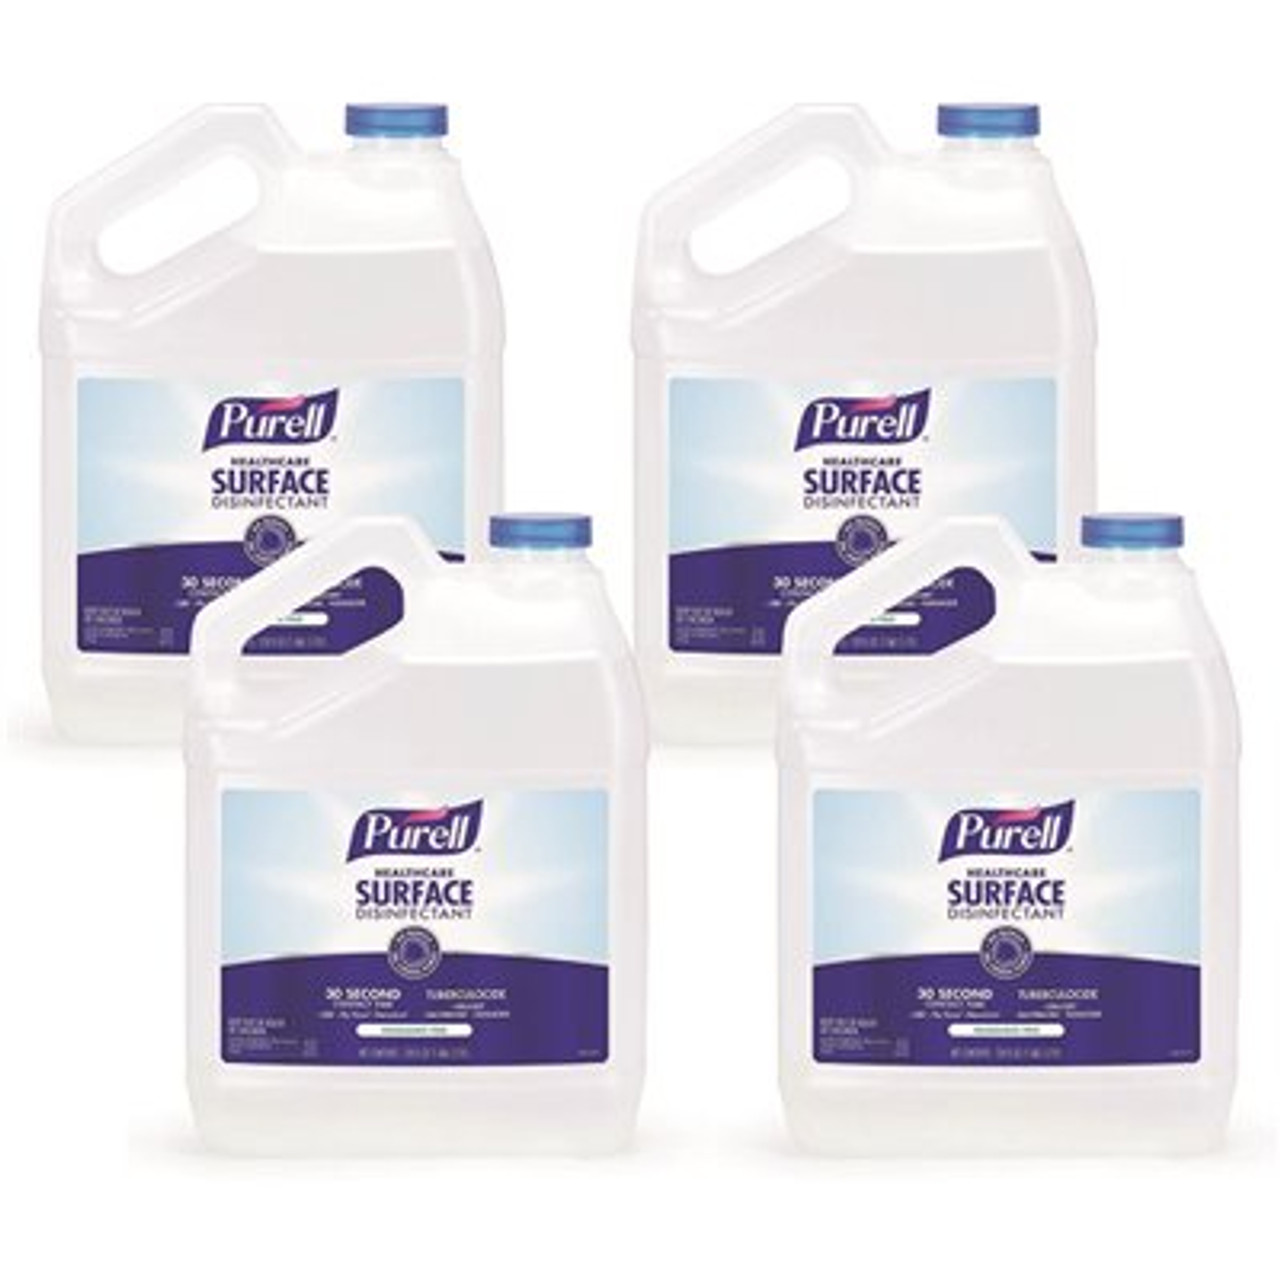 PURELL 1 Gal. Surface Disinfectant Pour Bottle Refill Healthcare Surface Disinfectant, Fragrance Free (4-Pack Per Case)